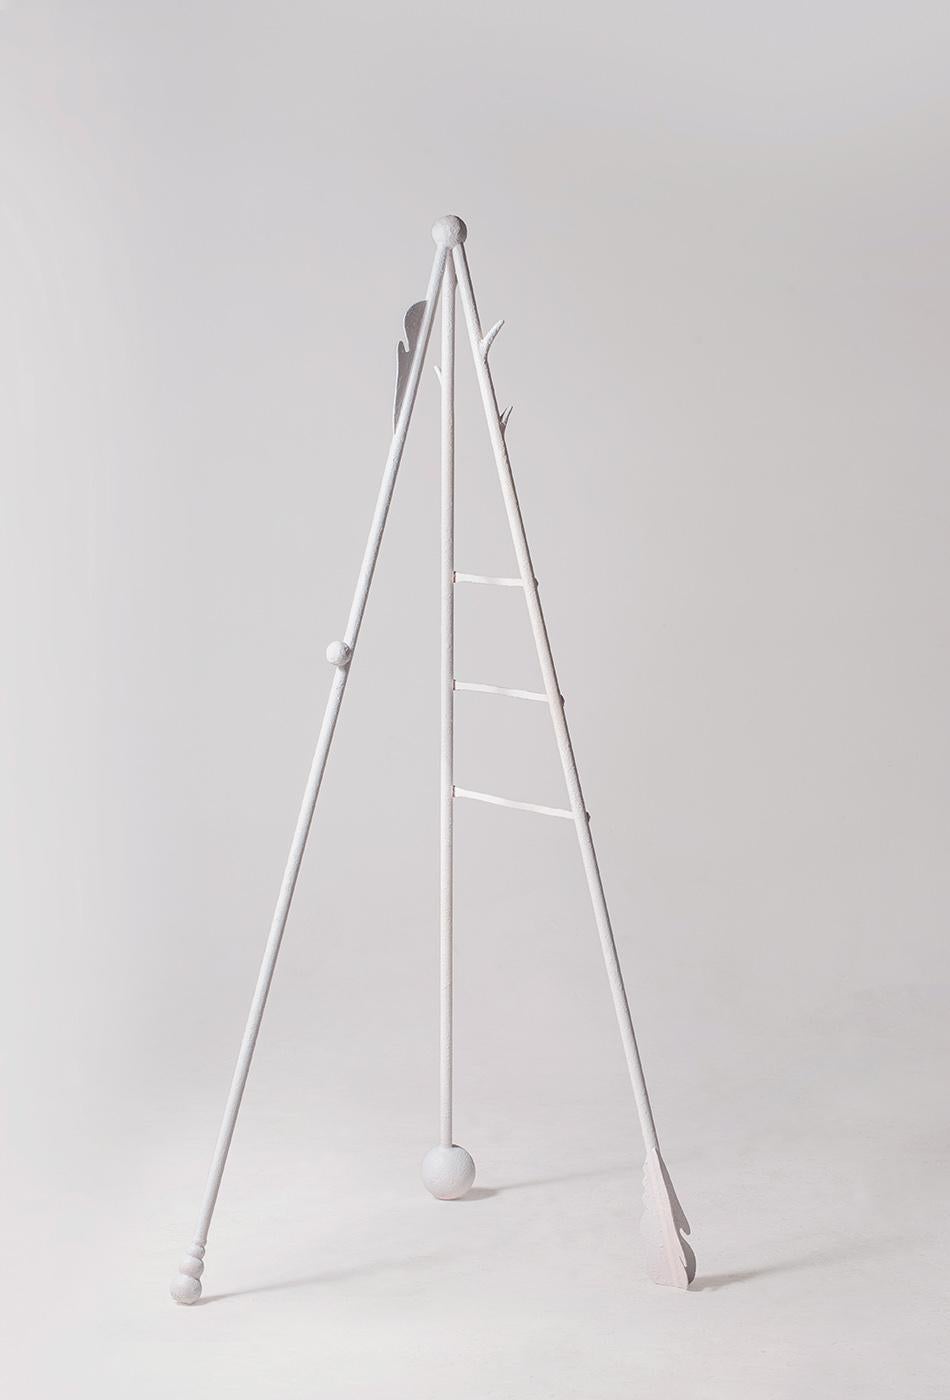 Italian Hand-Shaped and Welded Iron Elements Coatrack by Valentina Cameranesi For Sale